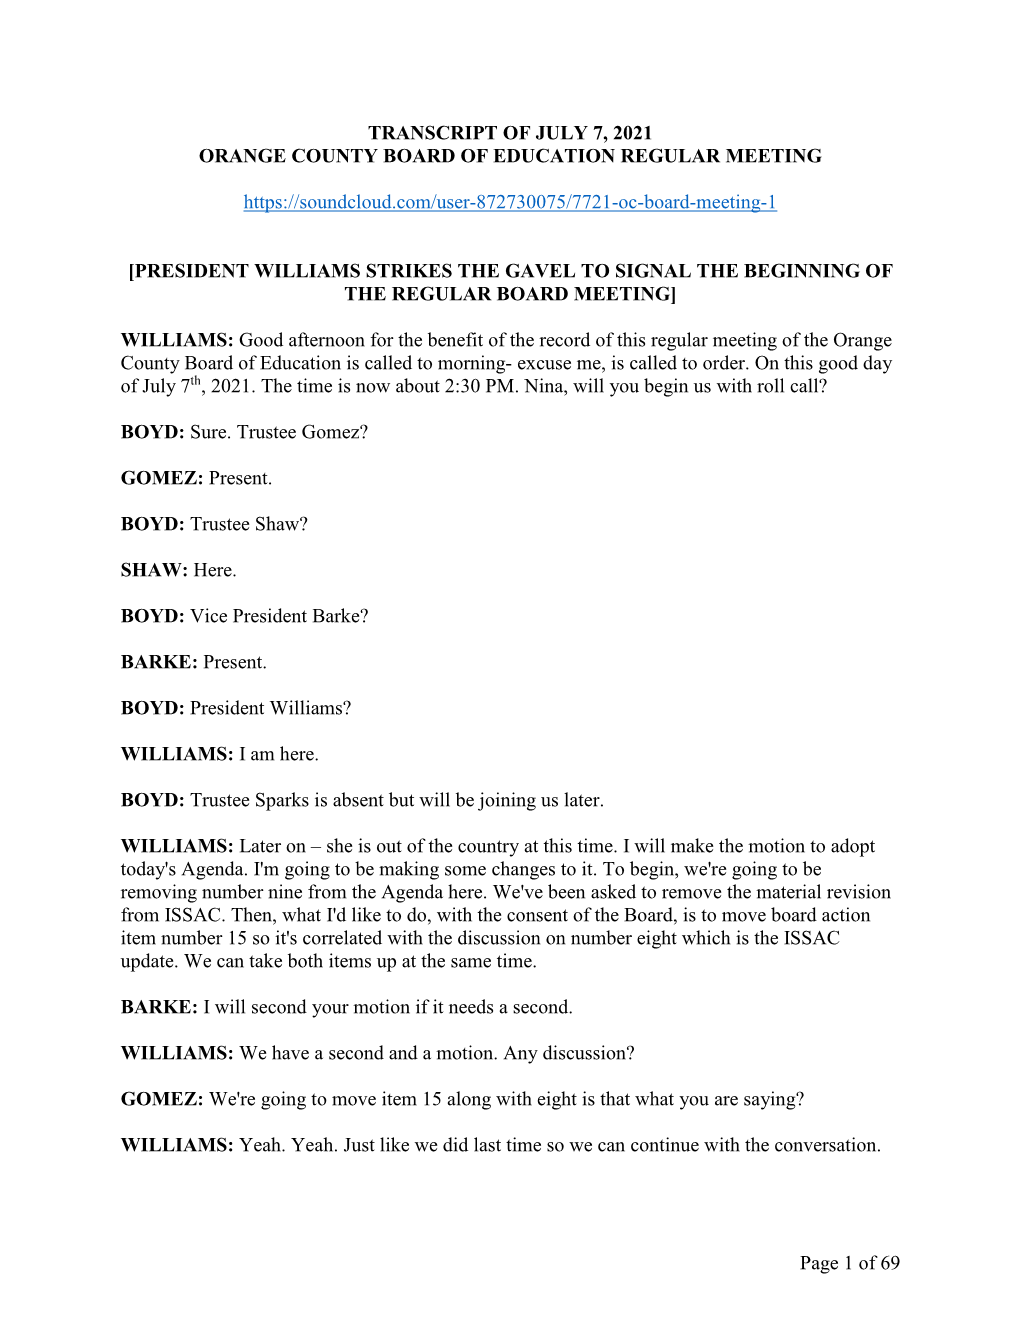 Page 1 of 69 TRANSCRIPT of JULY 7, 2021 ORANGE COUNTY BOARD of EDUCATION REGULAR MEETING